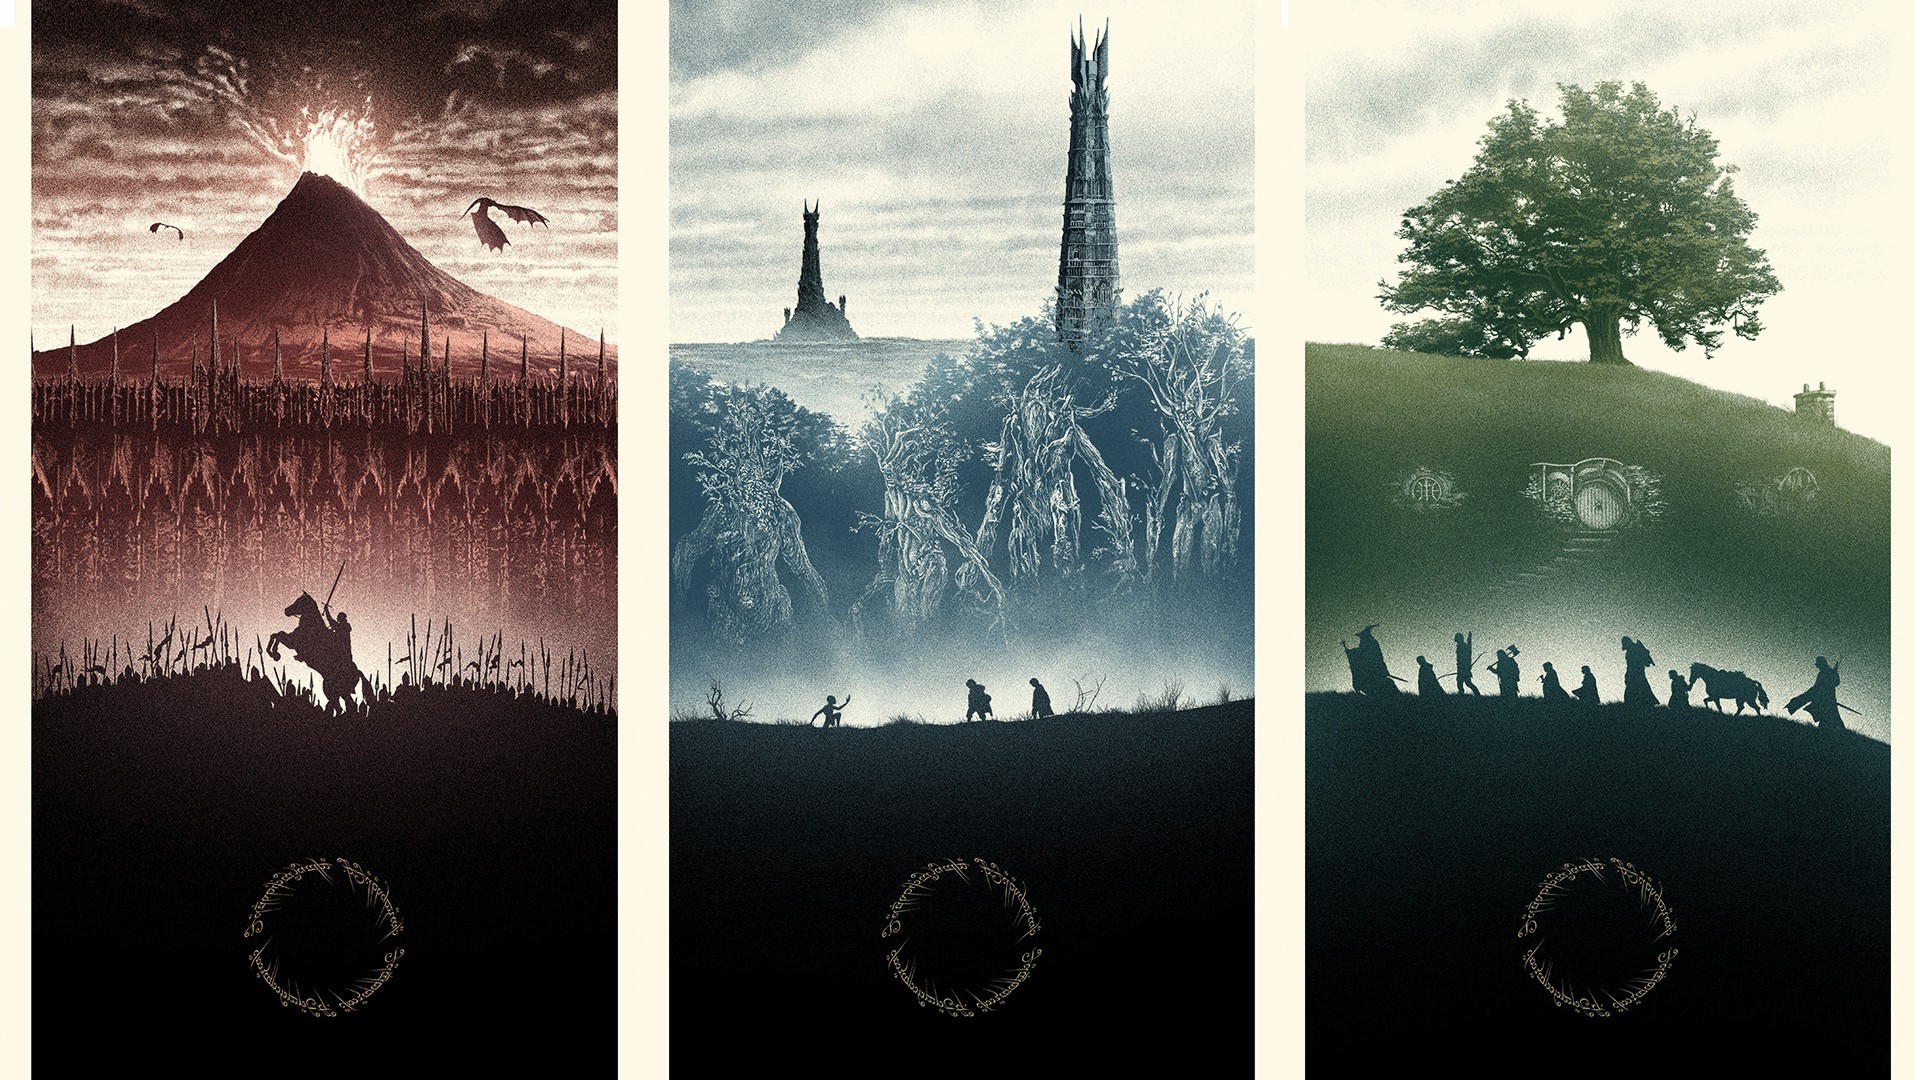 The Lord Of The Rings, The Shire, Bag End, Isengard, Mordor Wallpapers